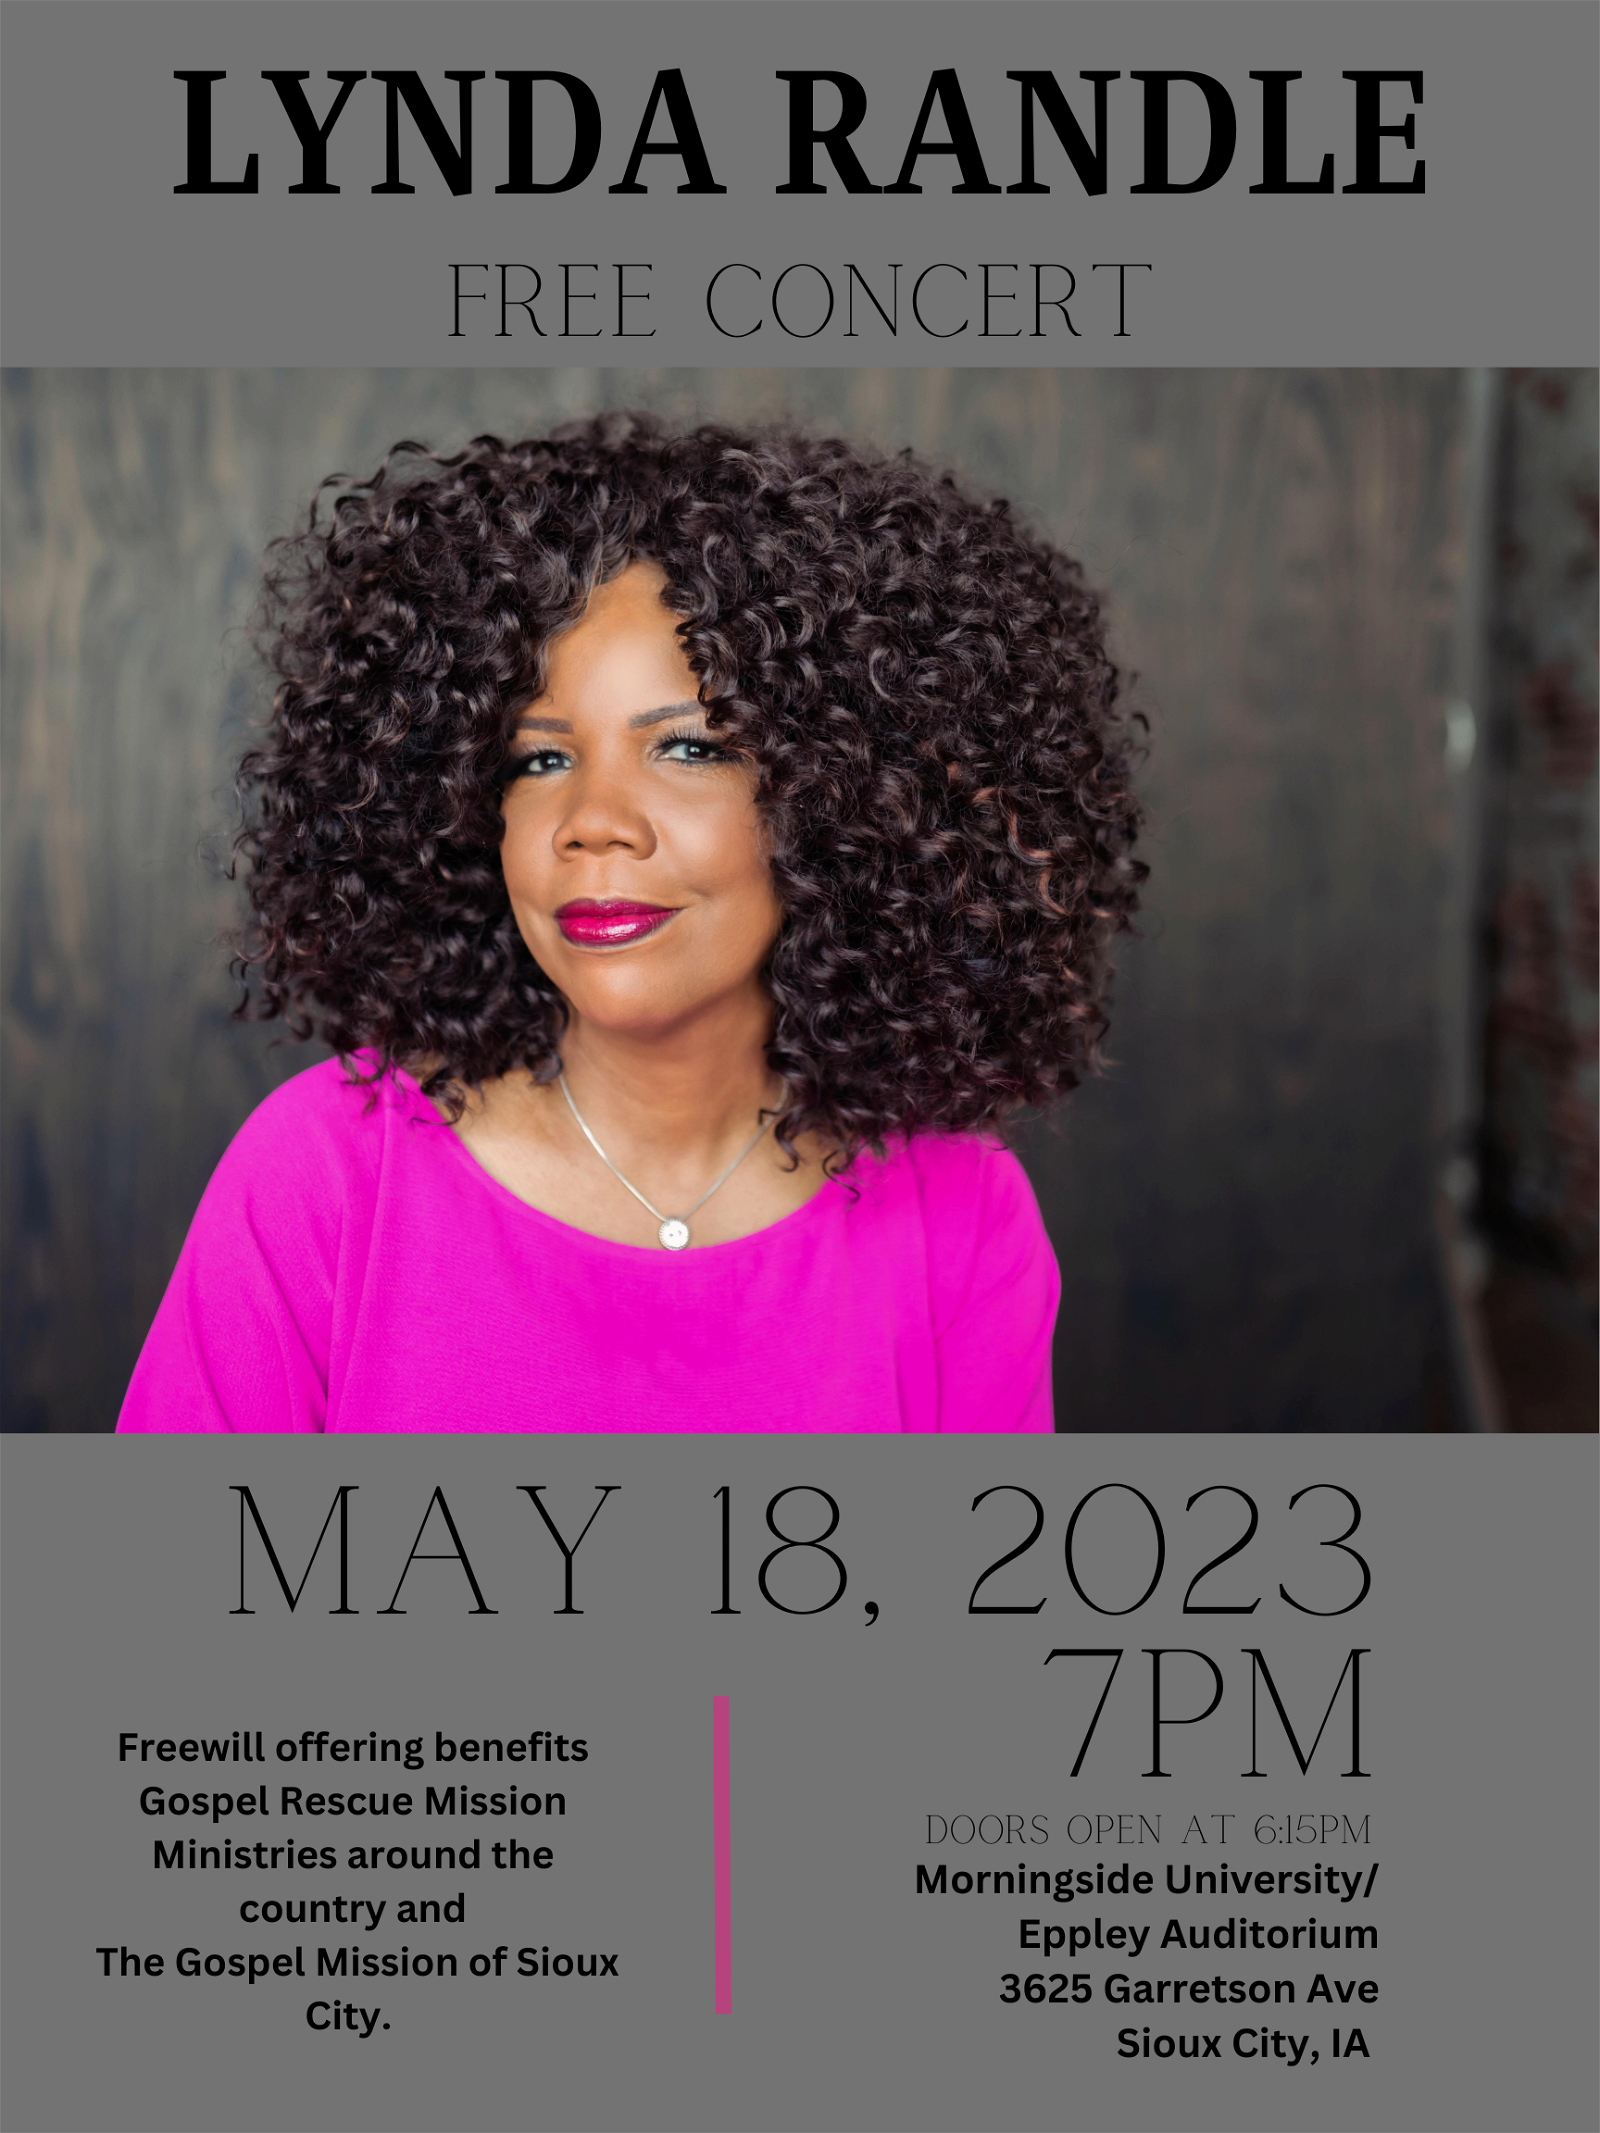 Join The Gospel Mission along with the Gospel Rescue Mission Fellowship (grmf) in welcoming Lynda Randle to Sioux City! She is throwing a benefit concert for grmf &amp; The Gospel Mission on May 18th, 7pm. See flyer for details. All proceeds benefit our Mission(s)!<br>Find out more about Lynda: <a href="https://www.lyndarandle.com/" rel="noopener noreferrer">https://www.lyndarandle.com/</a>